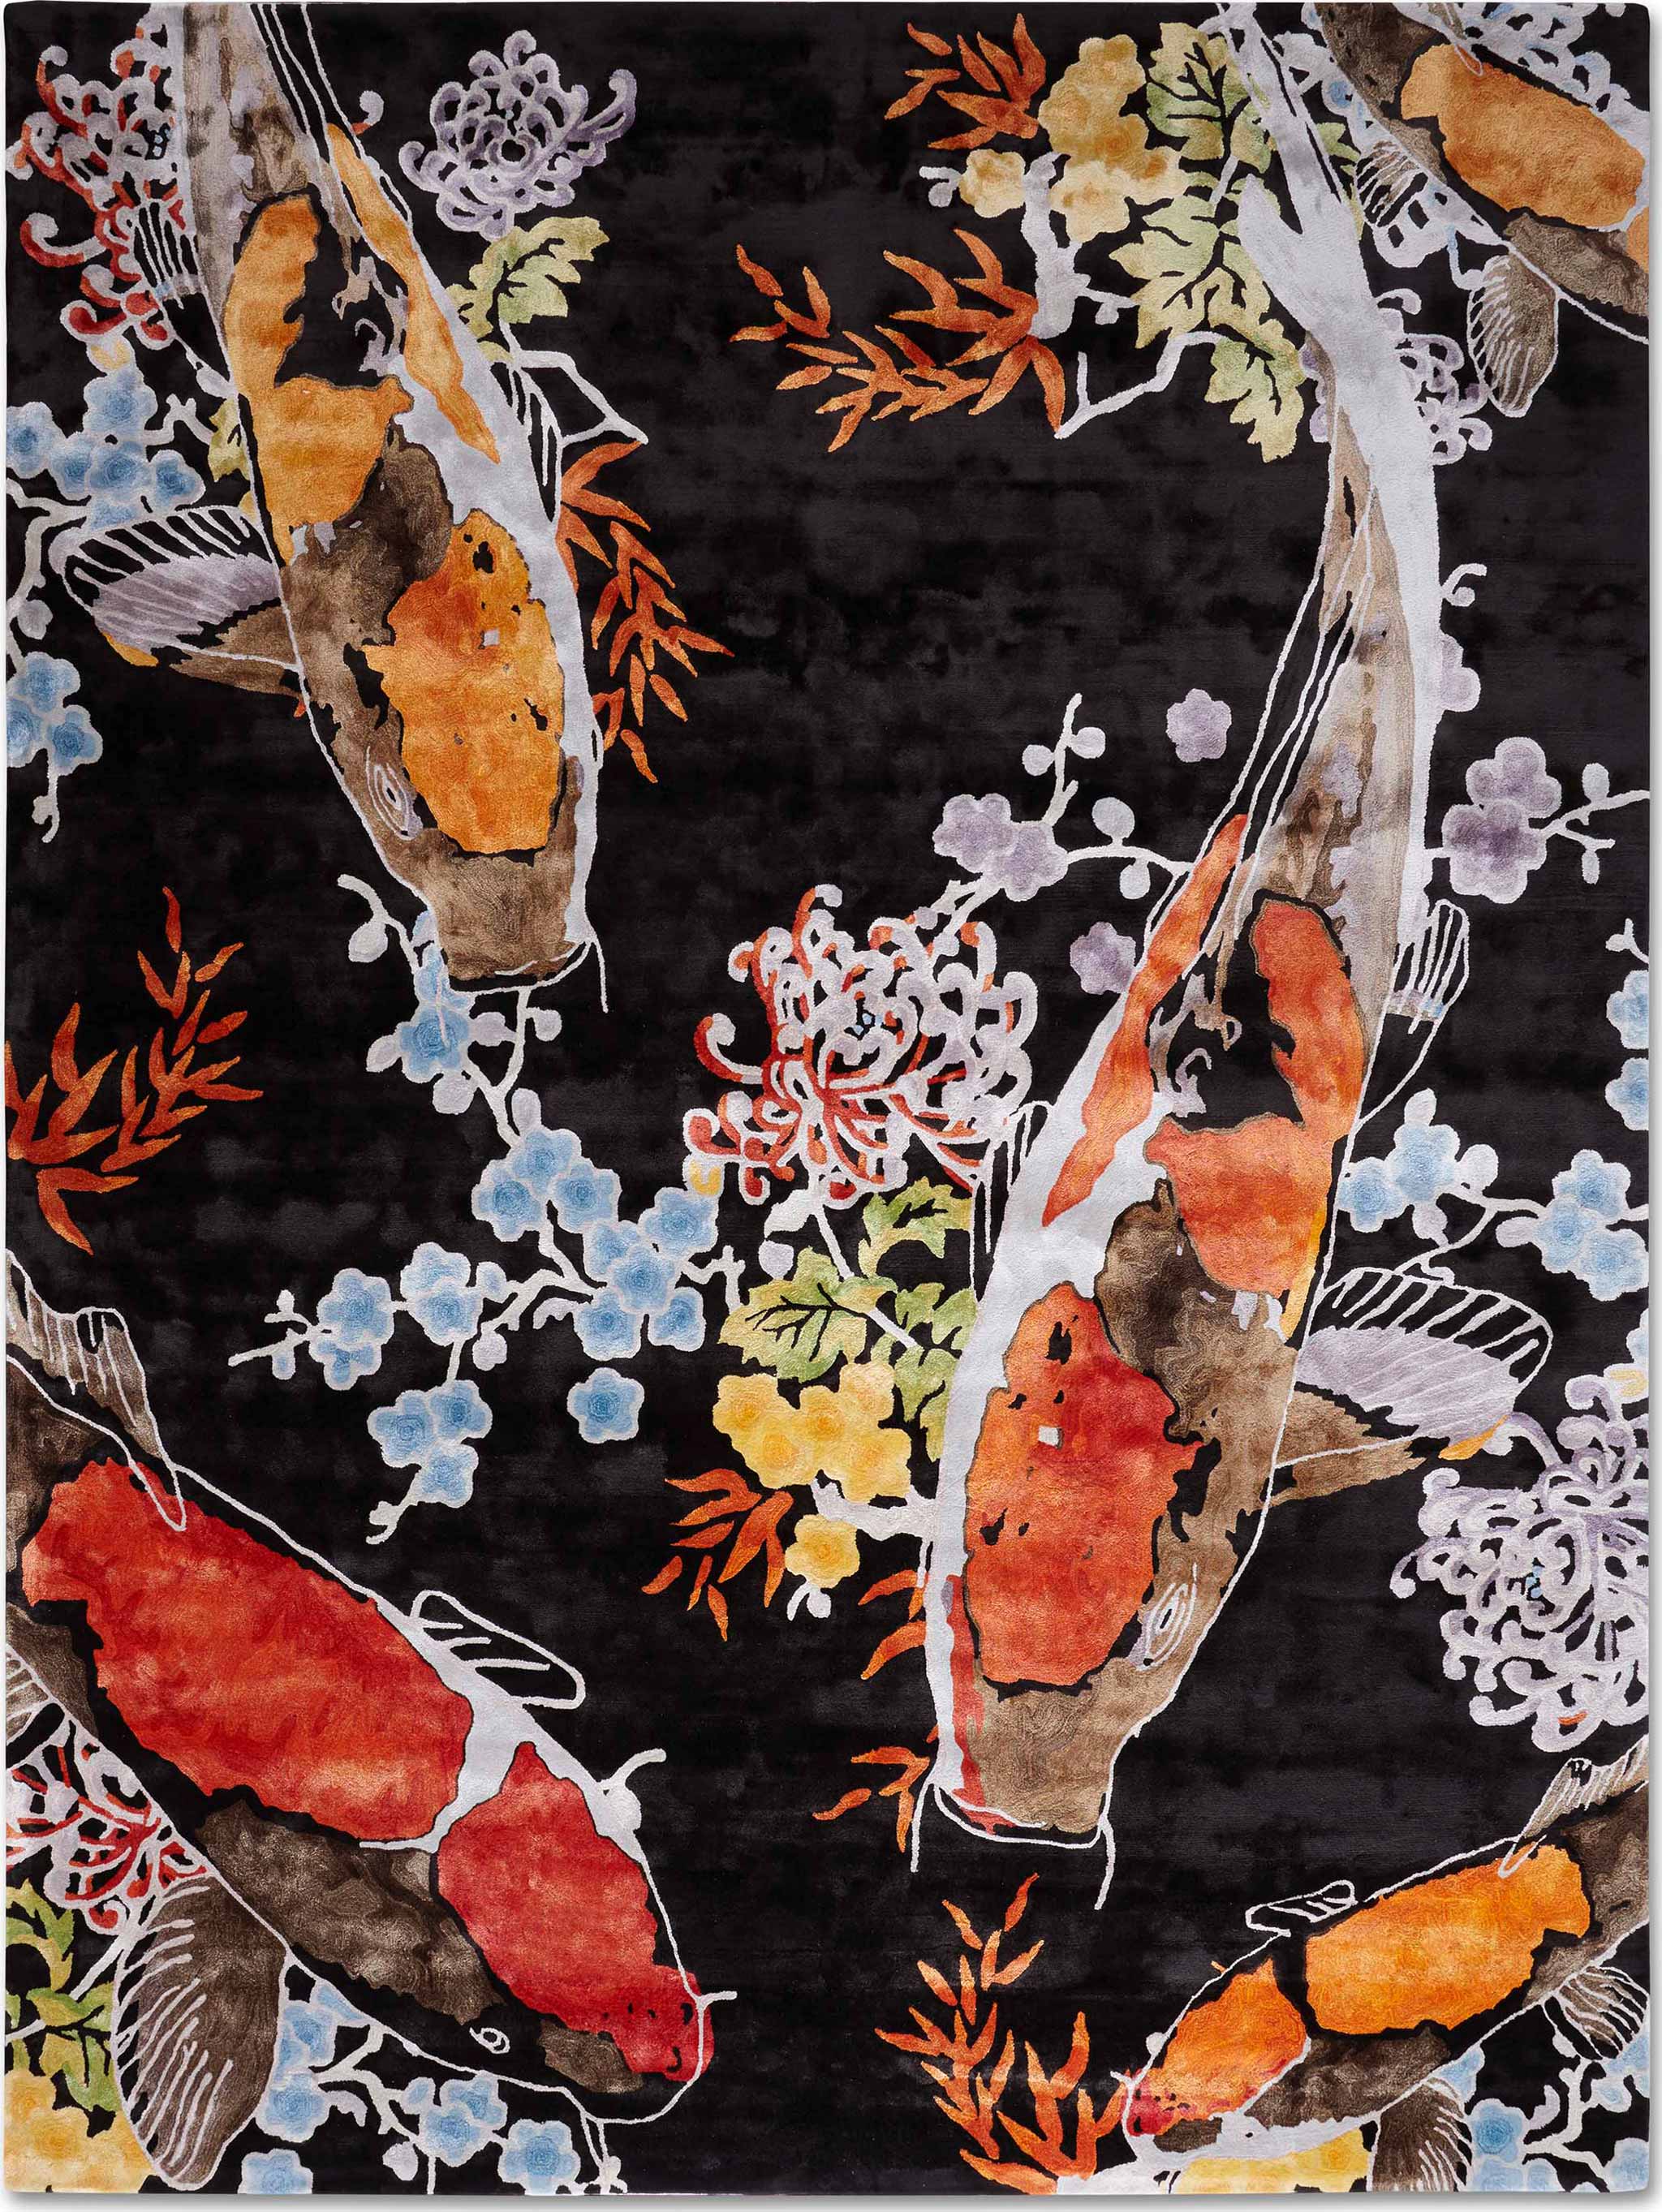 Koi 5 shown in colour Black by Rug Star by Jürgen Dahlmanns - 100% viscose tufted in China. | Image courtesy of Rug Star.